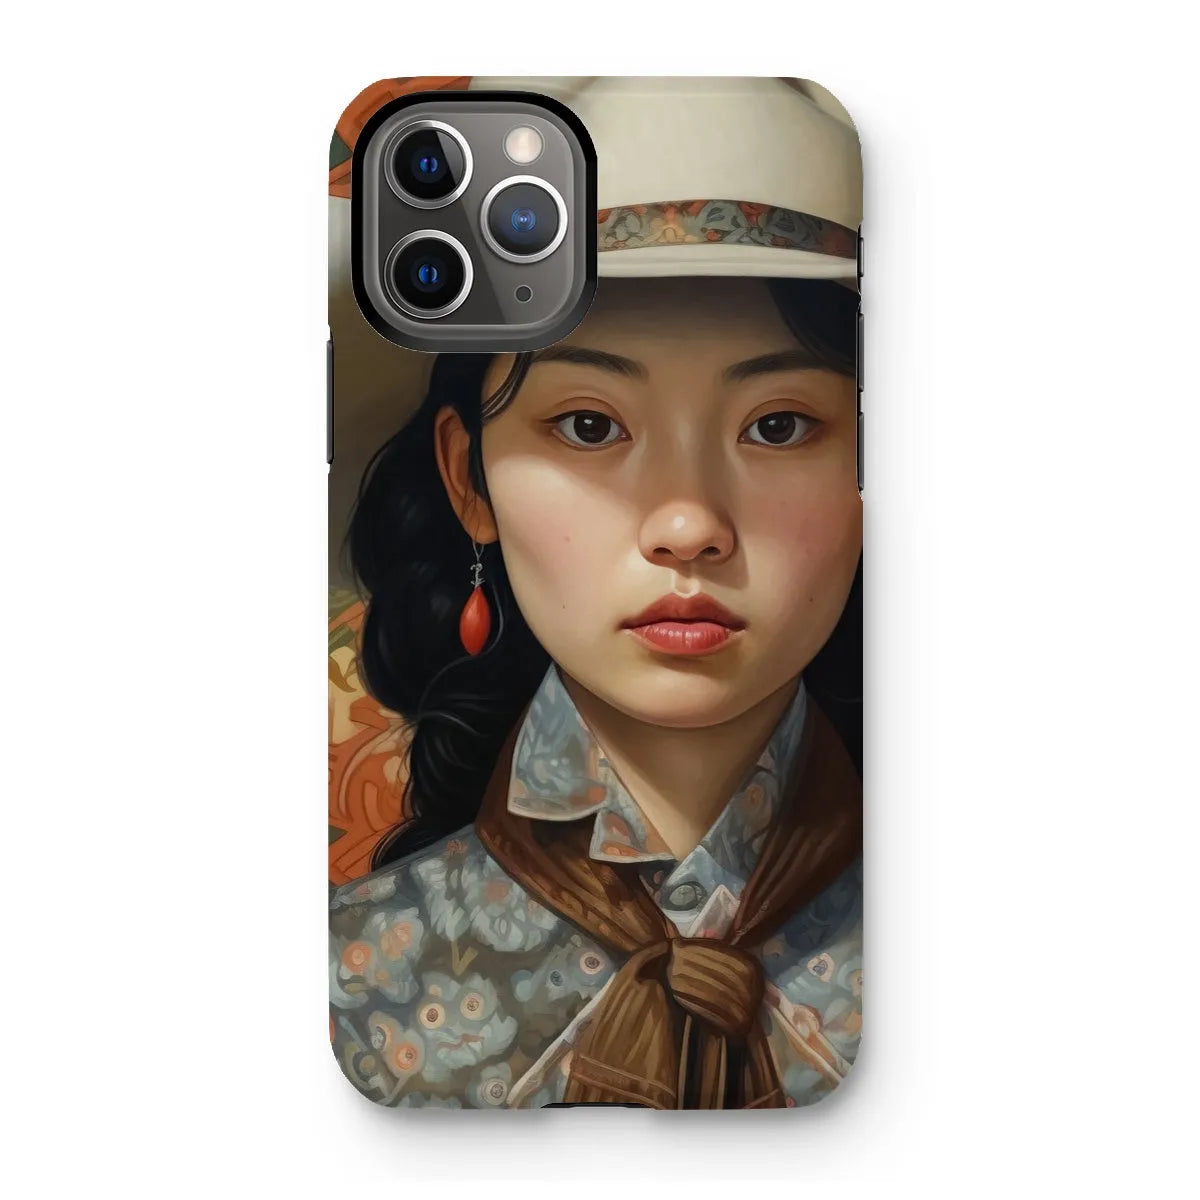 Zhi The Lesbian Cowgirl - Sapphic Art Phone Case - Iphone 11 Pro / Matte - Mobile Phone Cases - Aesthetic Art